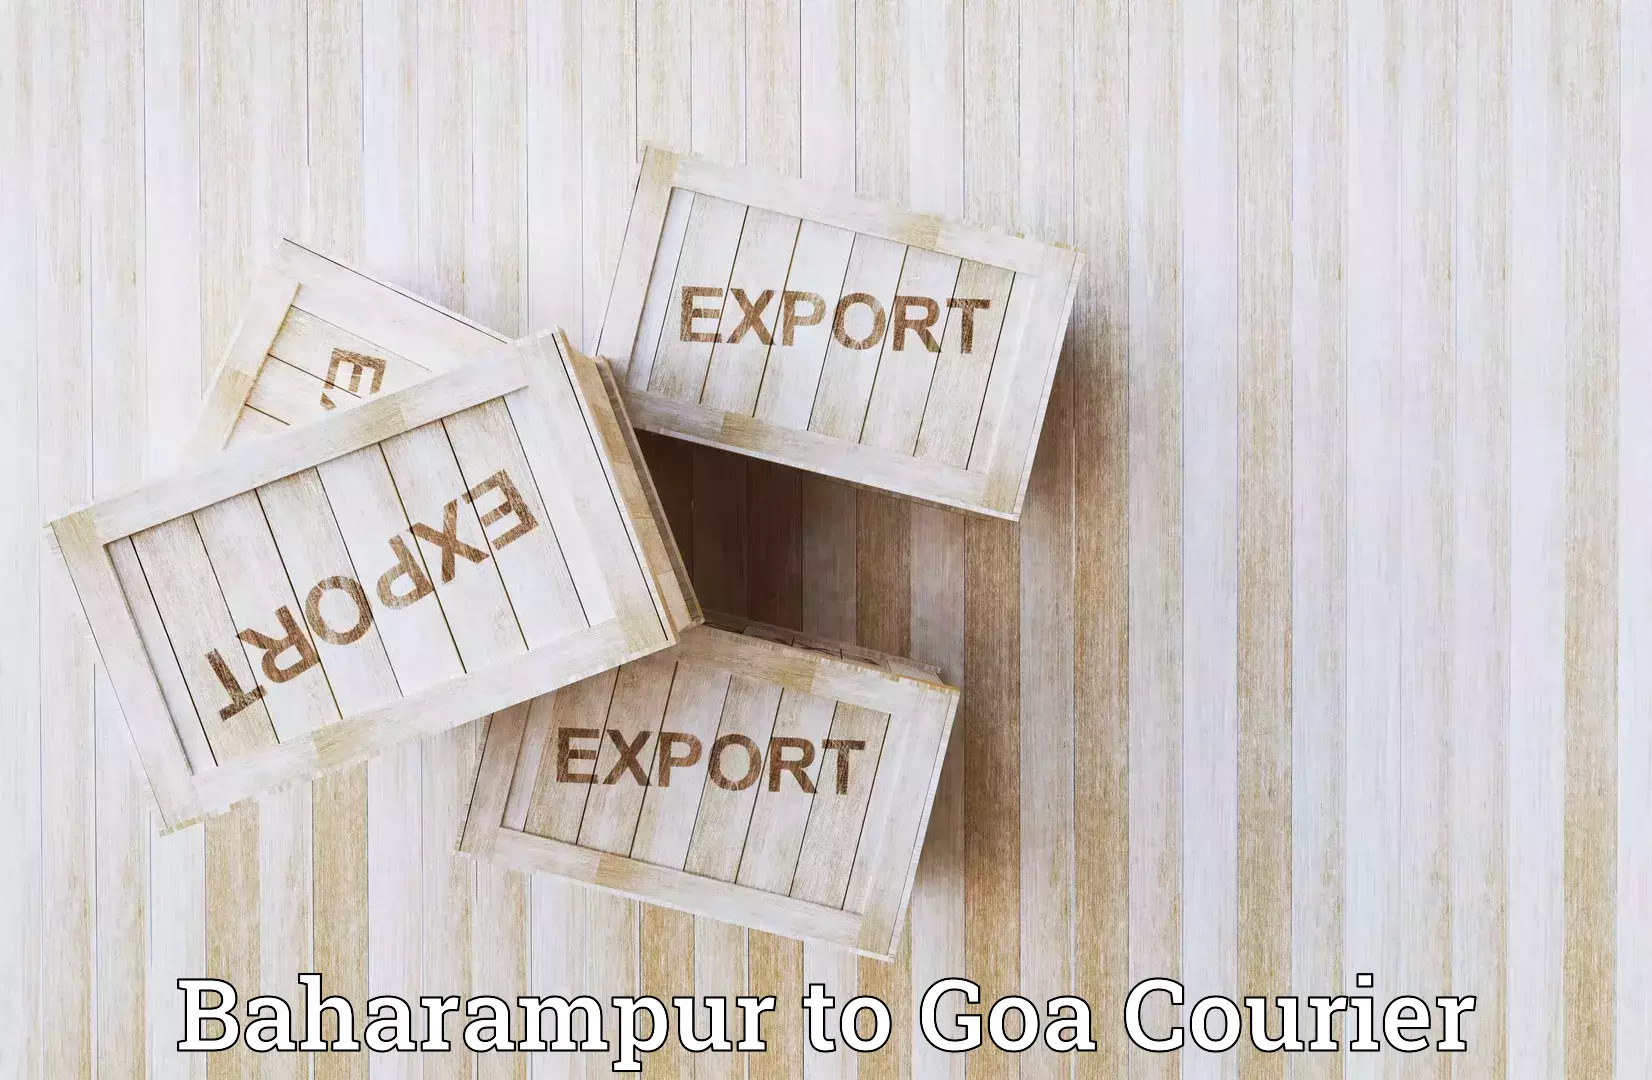 Courier service comparison Baharampur to South Goa